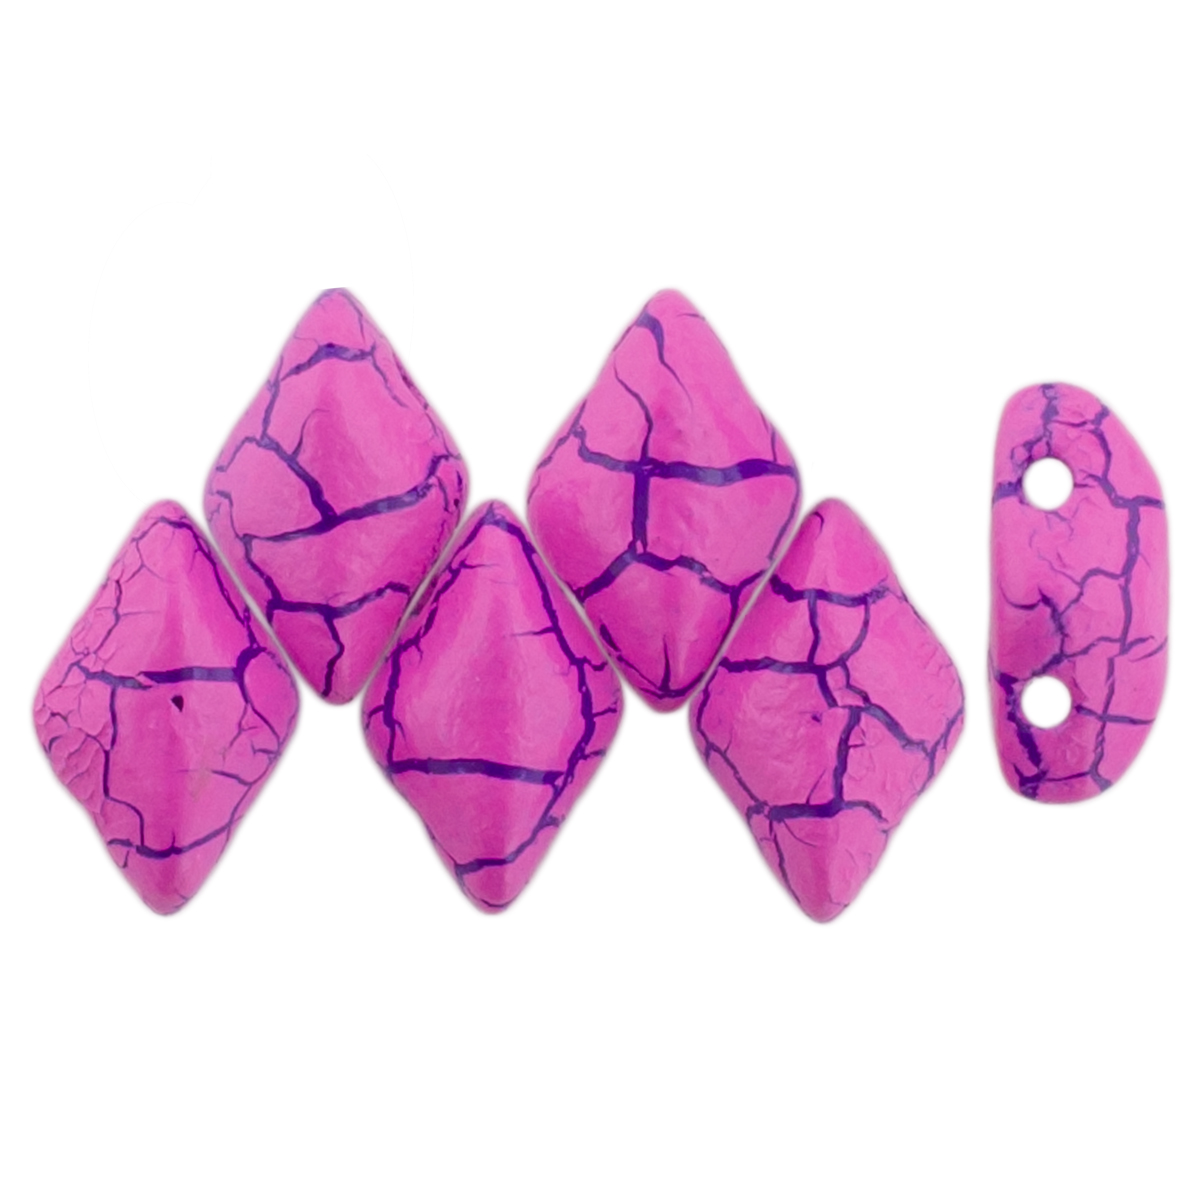 GEMDUO 8 x 5mm Tube 2.5" : Colortrends: Ionic Pink/Blue